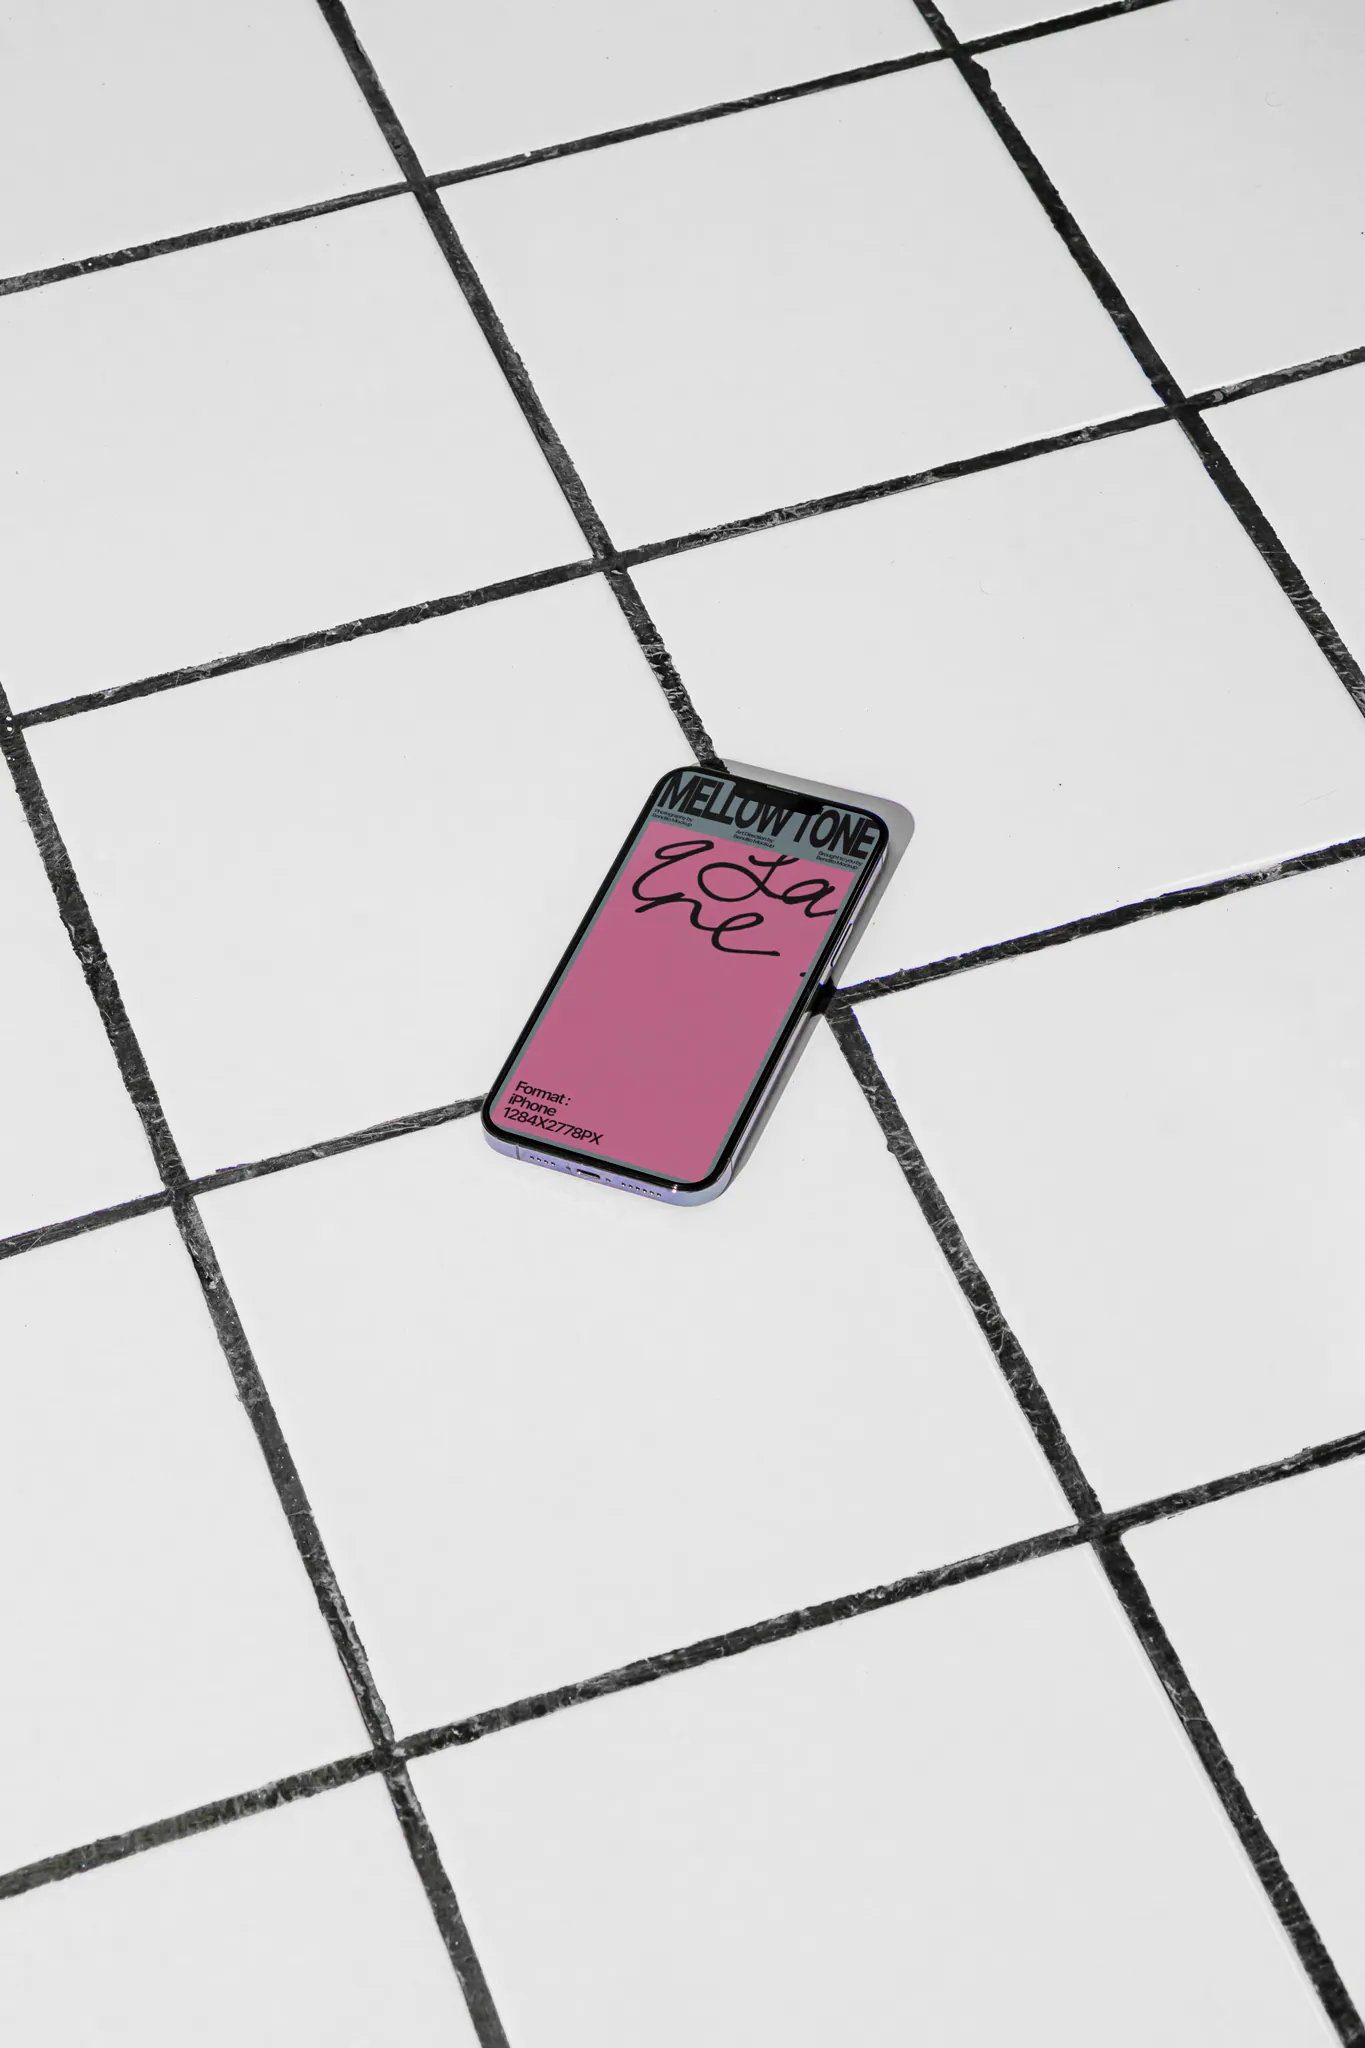 Premium and curated iPhone mockup resting on a floor made of white tiles. High-quality mockup on top of a white tiled surface. iPhone mockup PSD file with modern, contemporary photography.